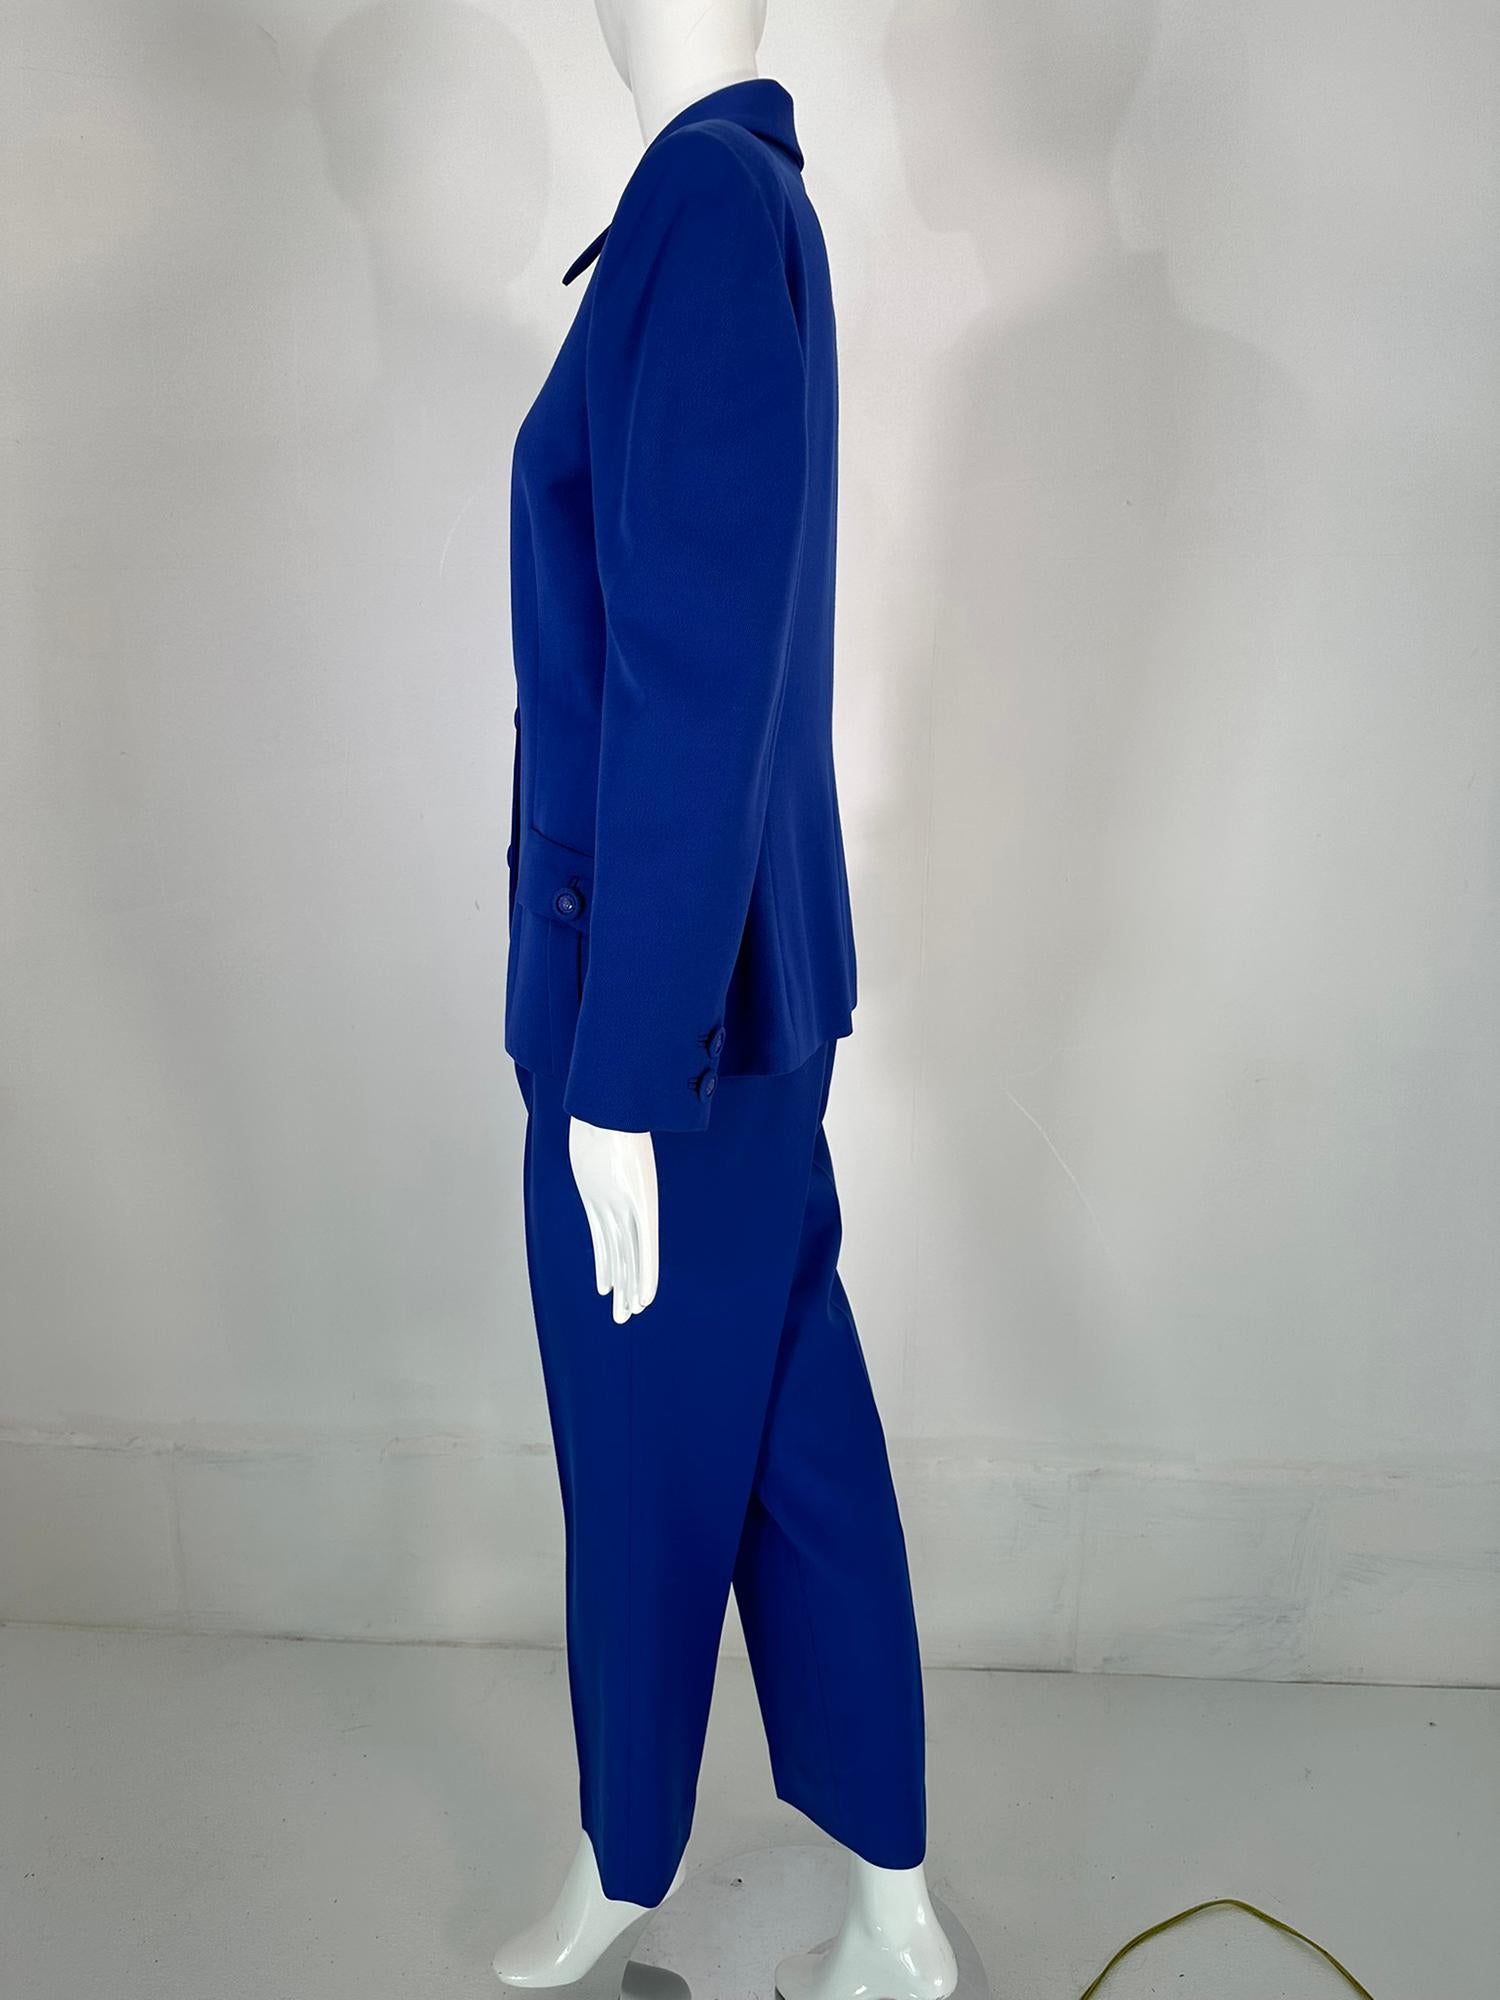 Gianni Versace Couture F/W 1995 Royal Blue Wool Pant Suit  For Sale 1